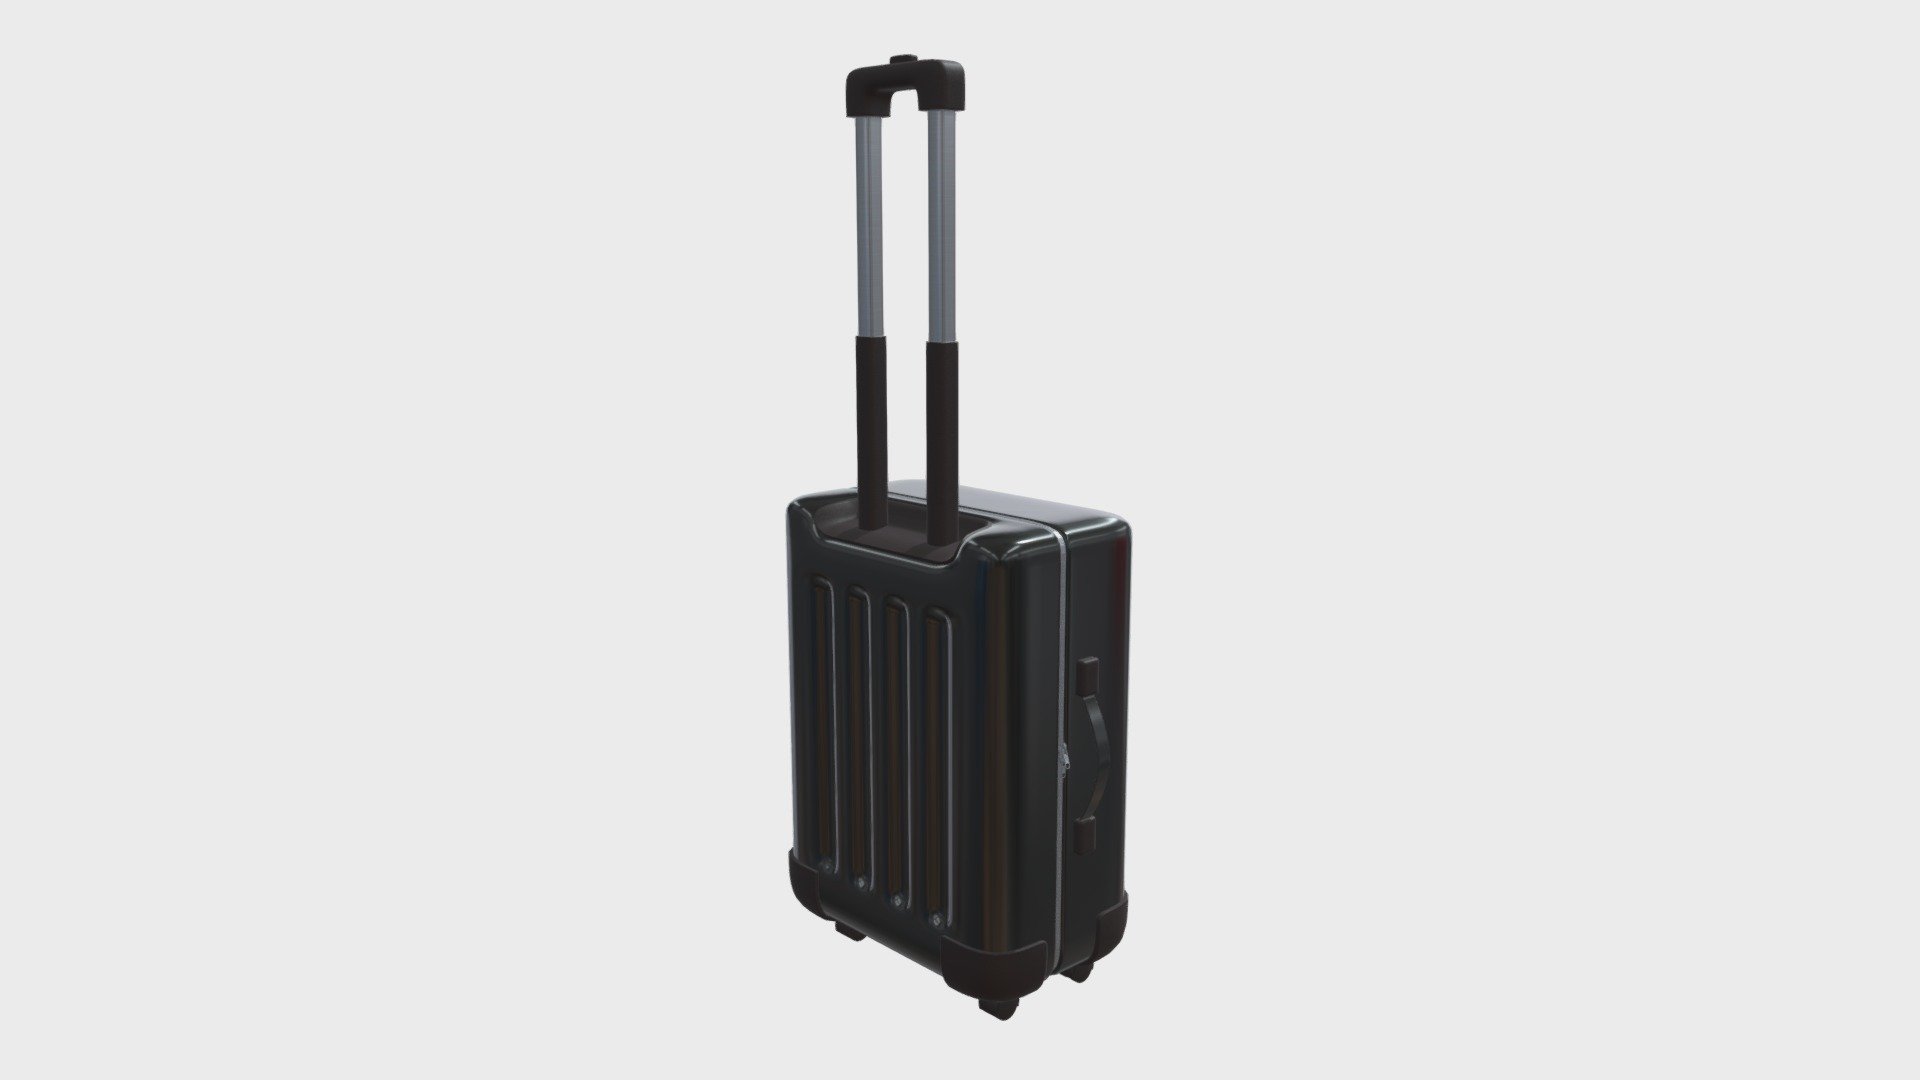 === The following description refers to the additional ZIP package provided with this model ===

Travel suitcase 3D Model. 3 individual objects (handle, main body, zipper), sharing 2 non overlapping UV Layout maps, Materials (travel suitcase and handle; zipper) and PBR Textures sets. Production-ready 3D Model, with PBR materials, textures, non overlapping UV Layout map provided in the package.

Quads only geometries (no tris/ngons).

Formats included: FBX, OBJ; scenes: BLEND (with Cycles / Eevee materials); other: png with Alpha.

3 Objects (meshes), 2 PBR Materials, UV unwrapped (non overlapping UV Layout map provided in the package); UV-mapped Textures.

UV Layout maps and Image Textures resolutions: 2048x2048; PBR Textures made with Substance Painter.

Polygonal, QUADS ONLY (no tris/ngons); 411052 vertices, 409554 quad faces (819108 tris).

Real world dimensions; scene scale units: cm in Blender (that is: Metric with 0.01 scale).

Uniform scale object (scale applied in Blender) 3d model